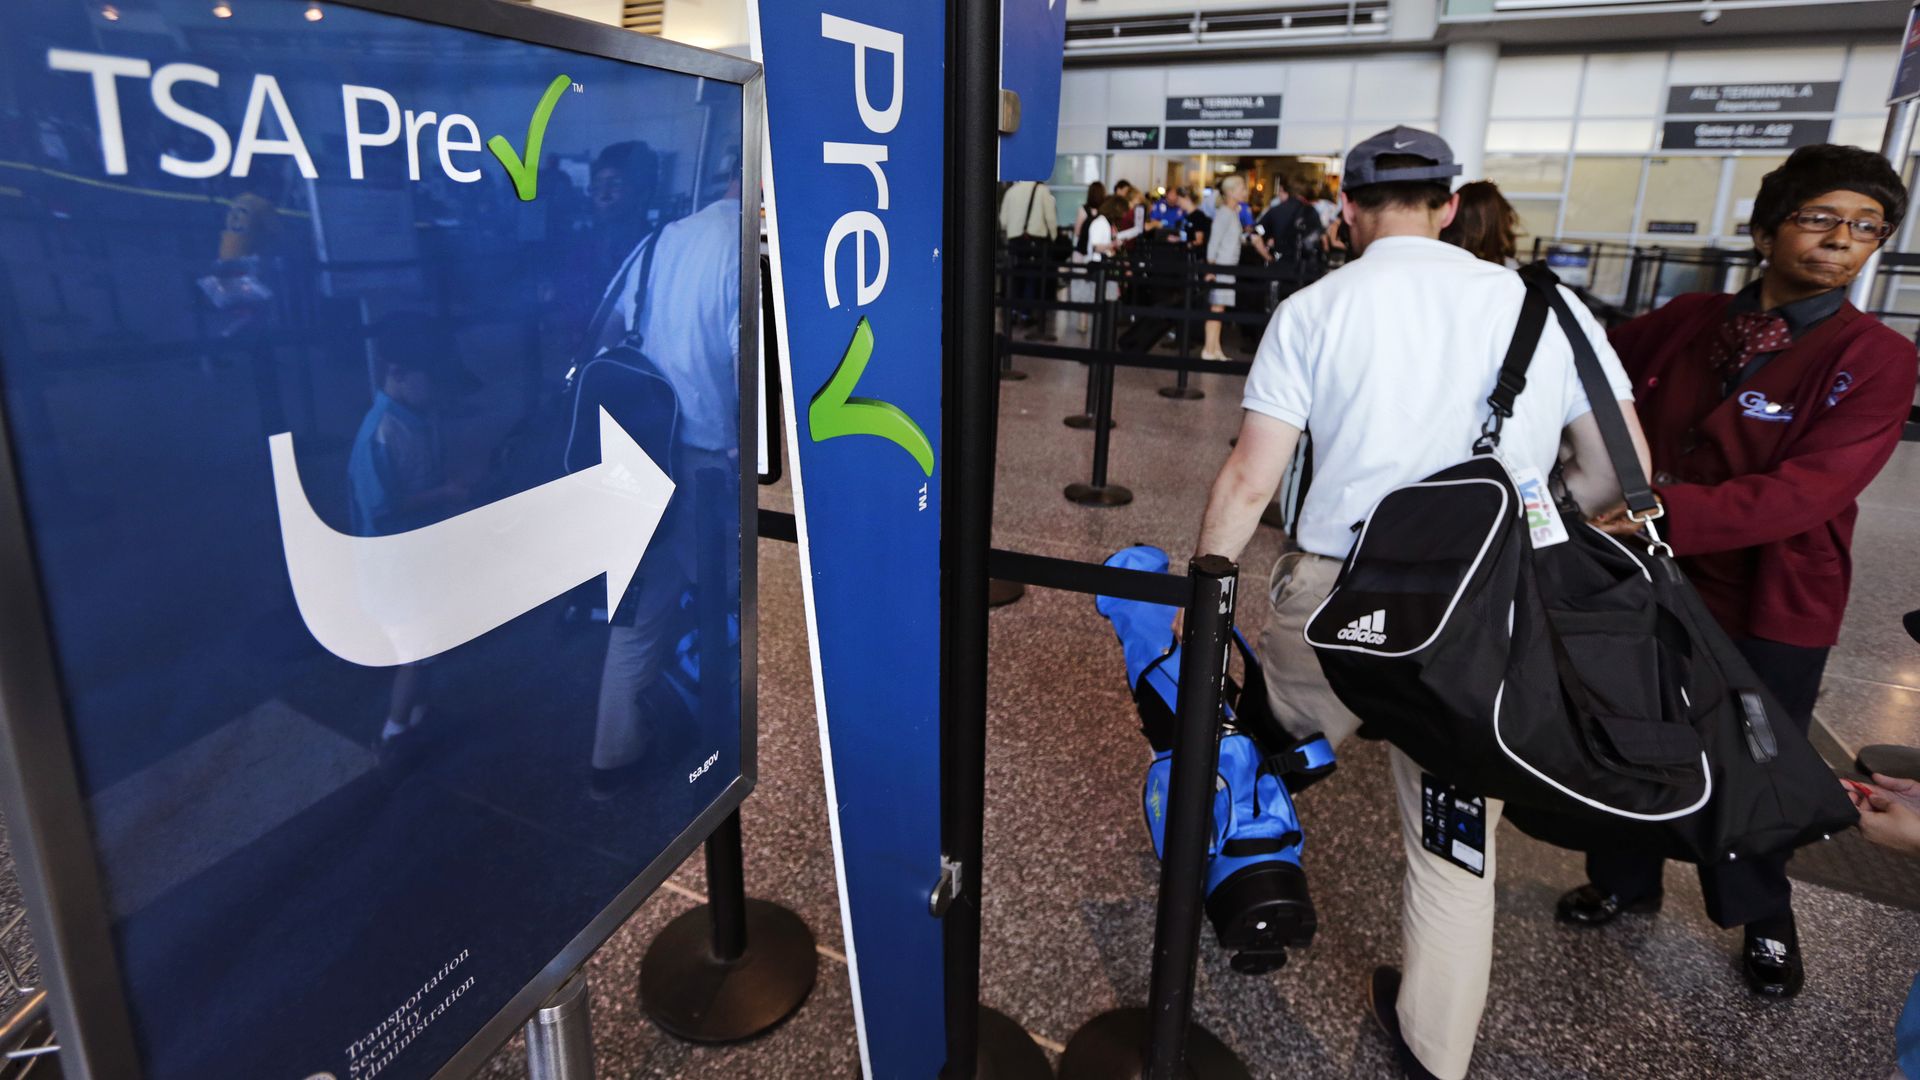 A passenger passes by a sign for the Transportation Security Administration's TSA Precheck line in Boston Logan.